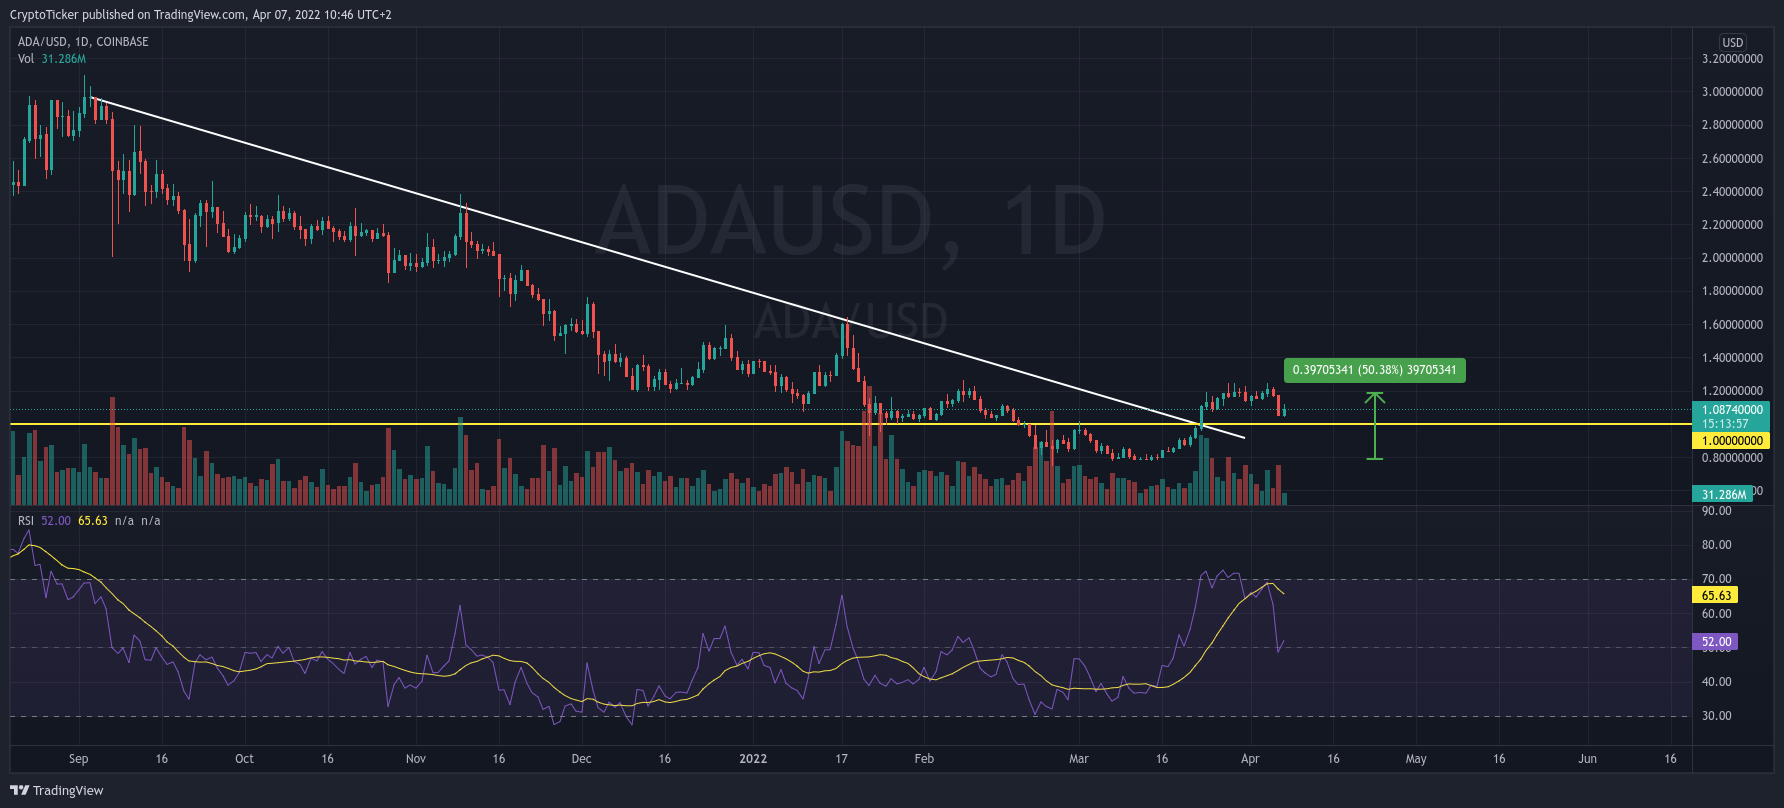 Cardano price 2$: ADA/USD 1-day chart showing the 50% price increase in ADA prices